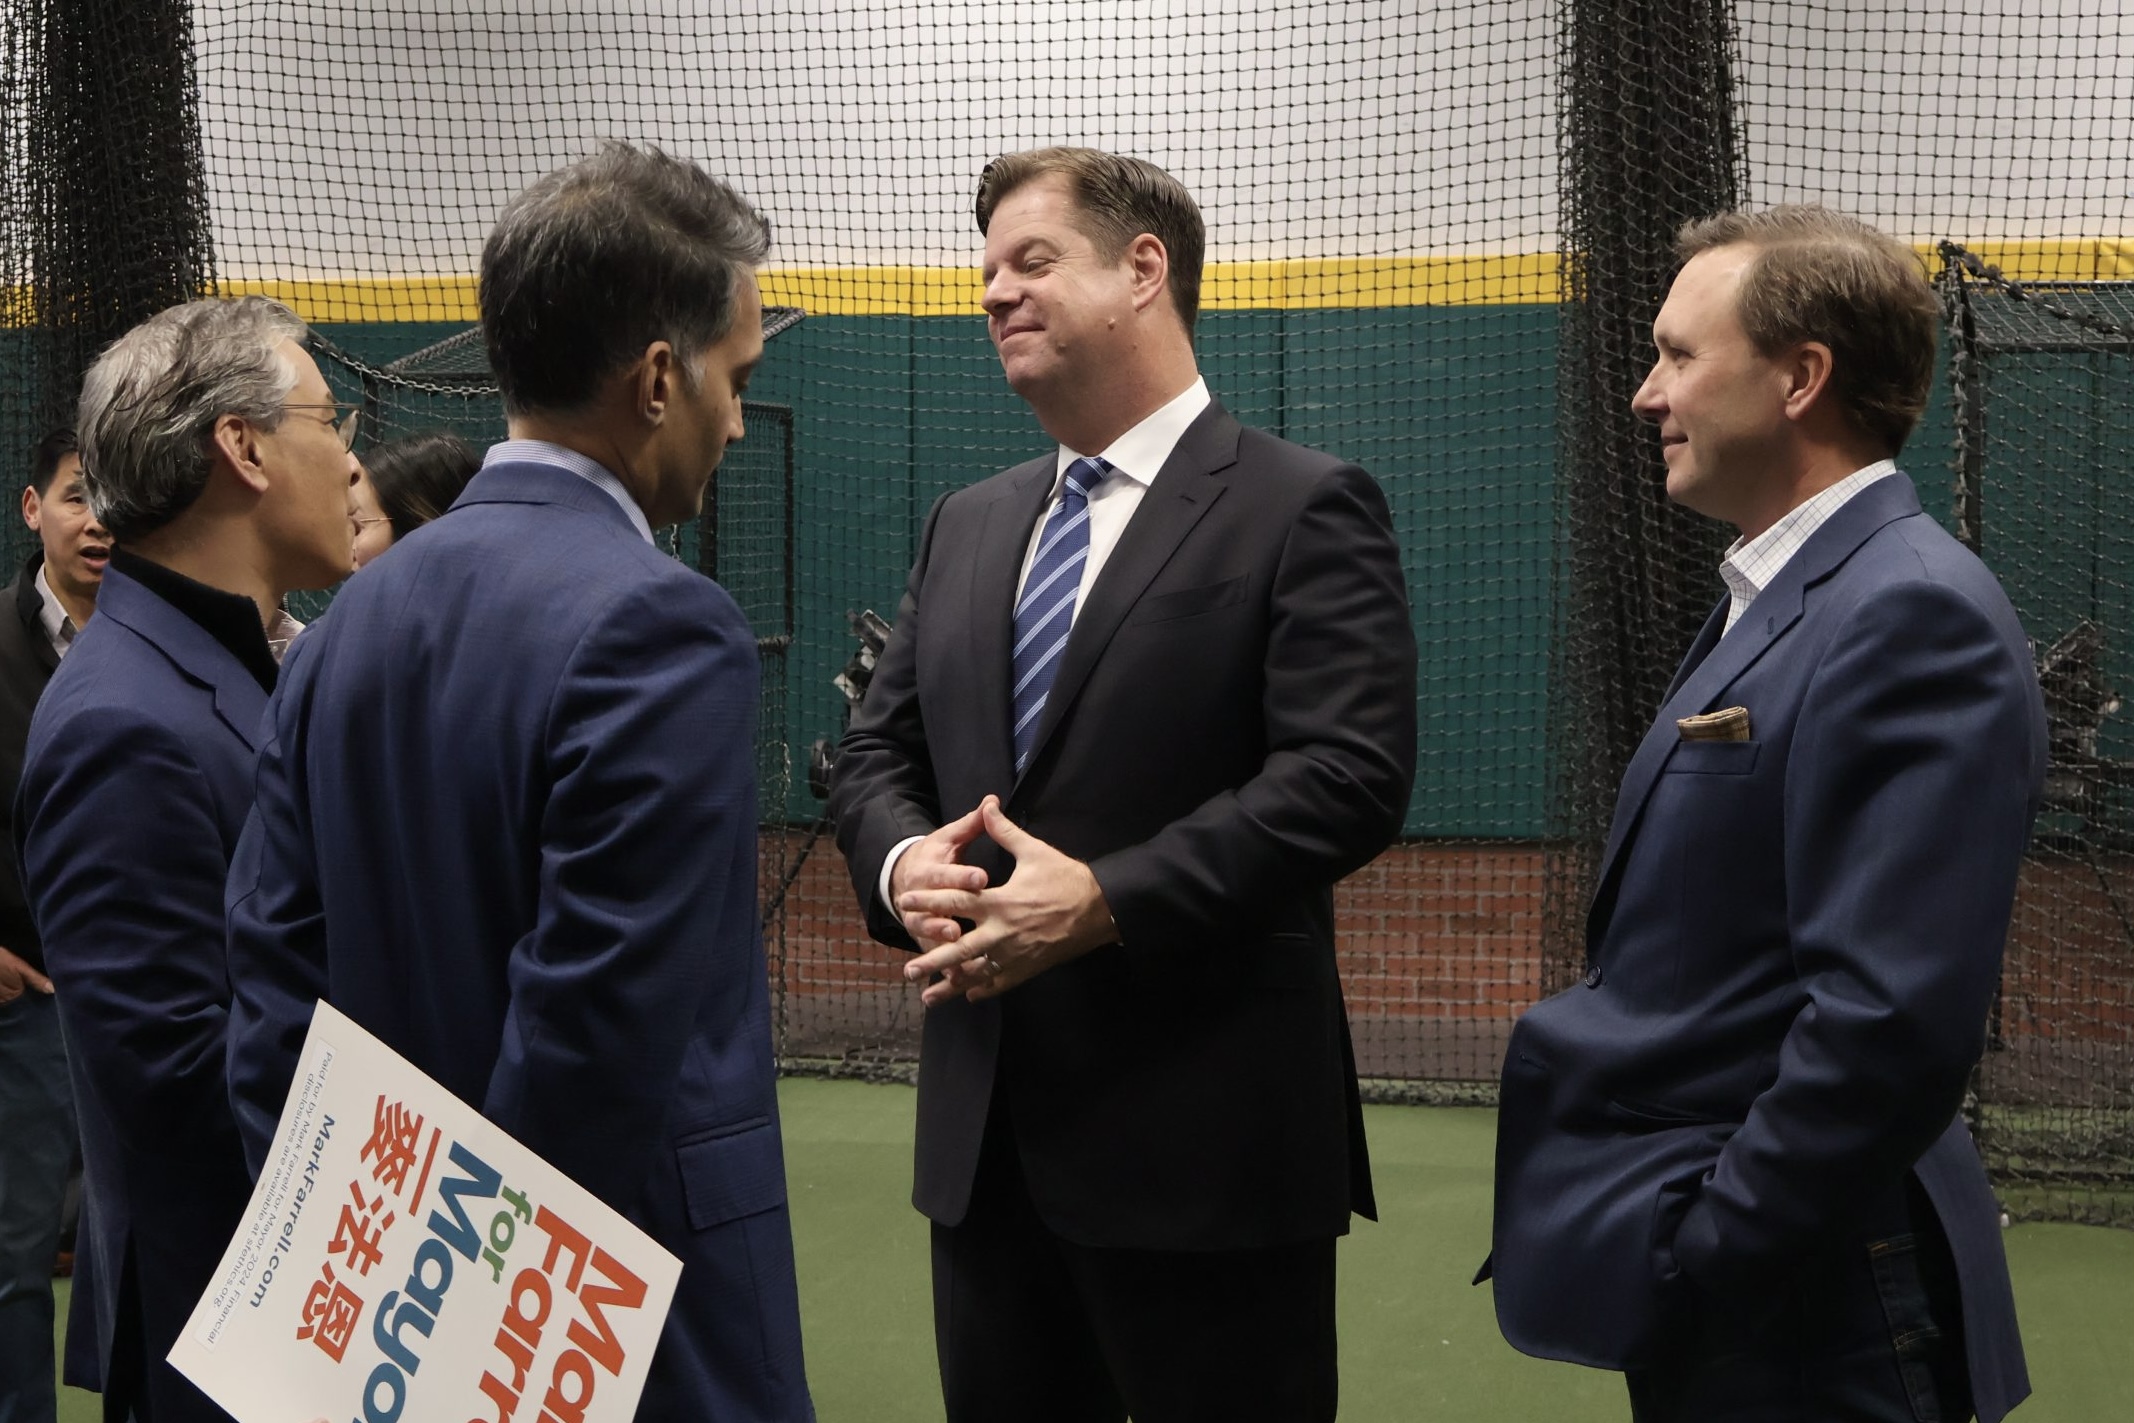 Four men in business attire are conversing in an indoor setting, with one holding a sign. A netted wall and green flooring are visible in the background.